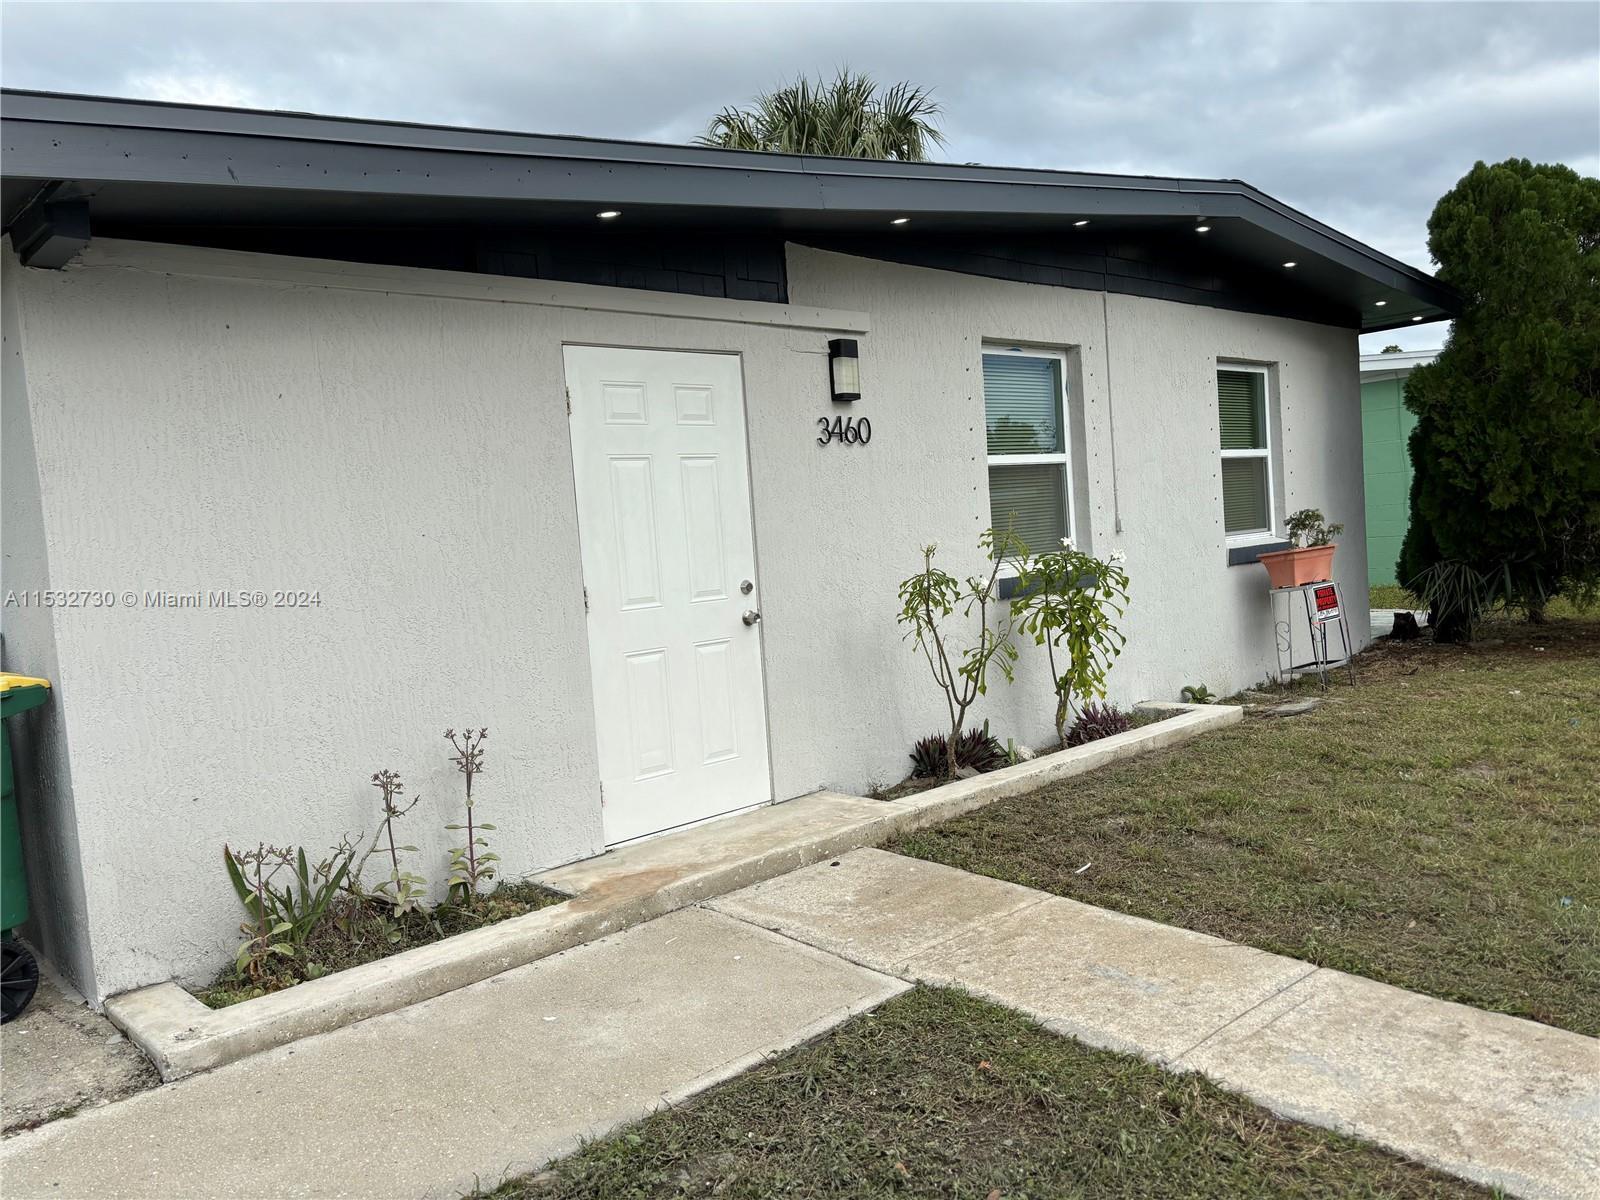 Photo of 3460 Normandy Dr in Port Charlotte, FL